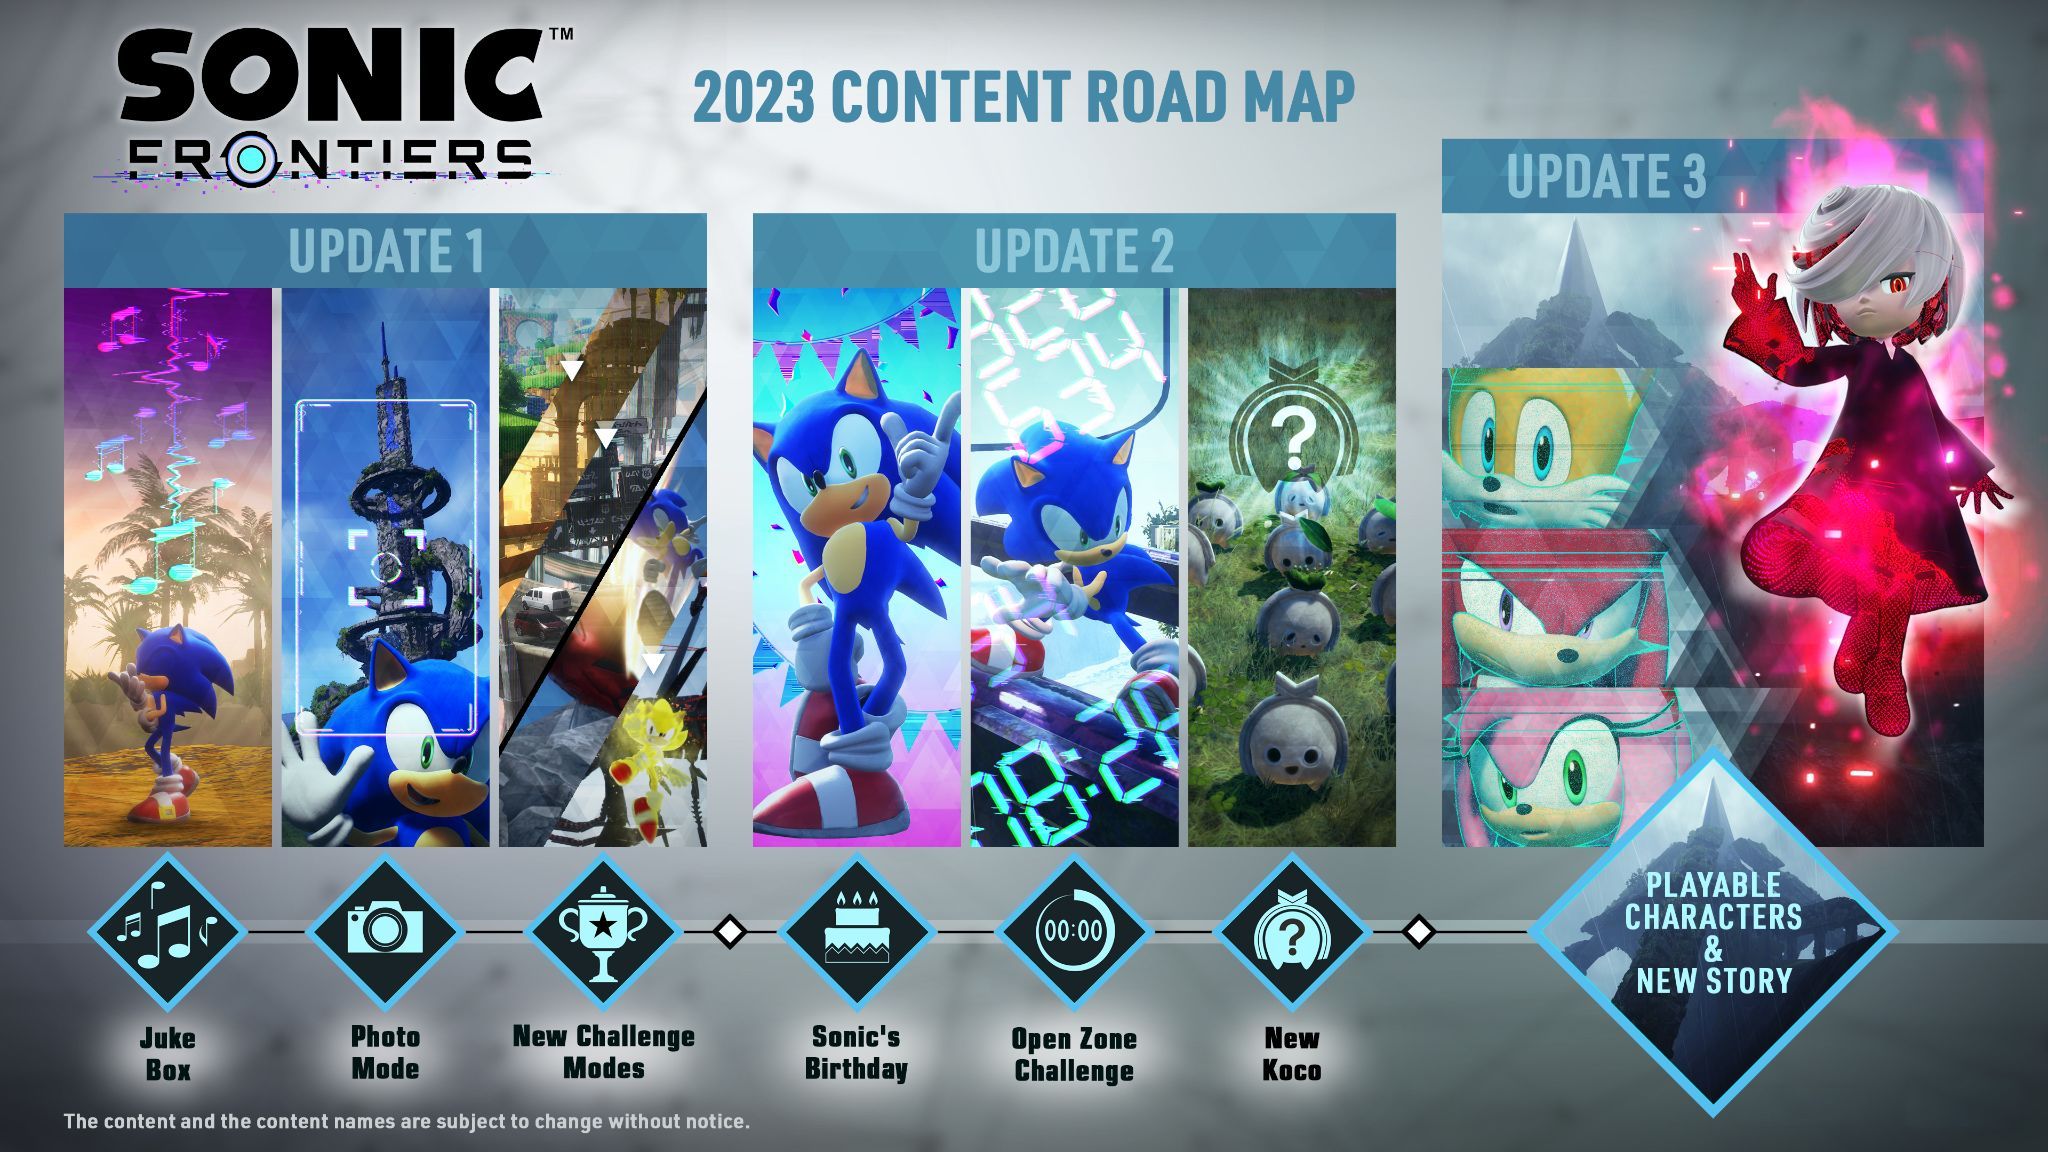 Sonic Frontiers 2023 Roadmap Reveals Playable Tails, Knuckles, And Amy